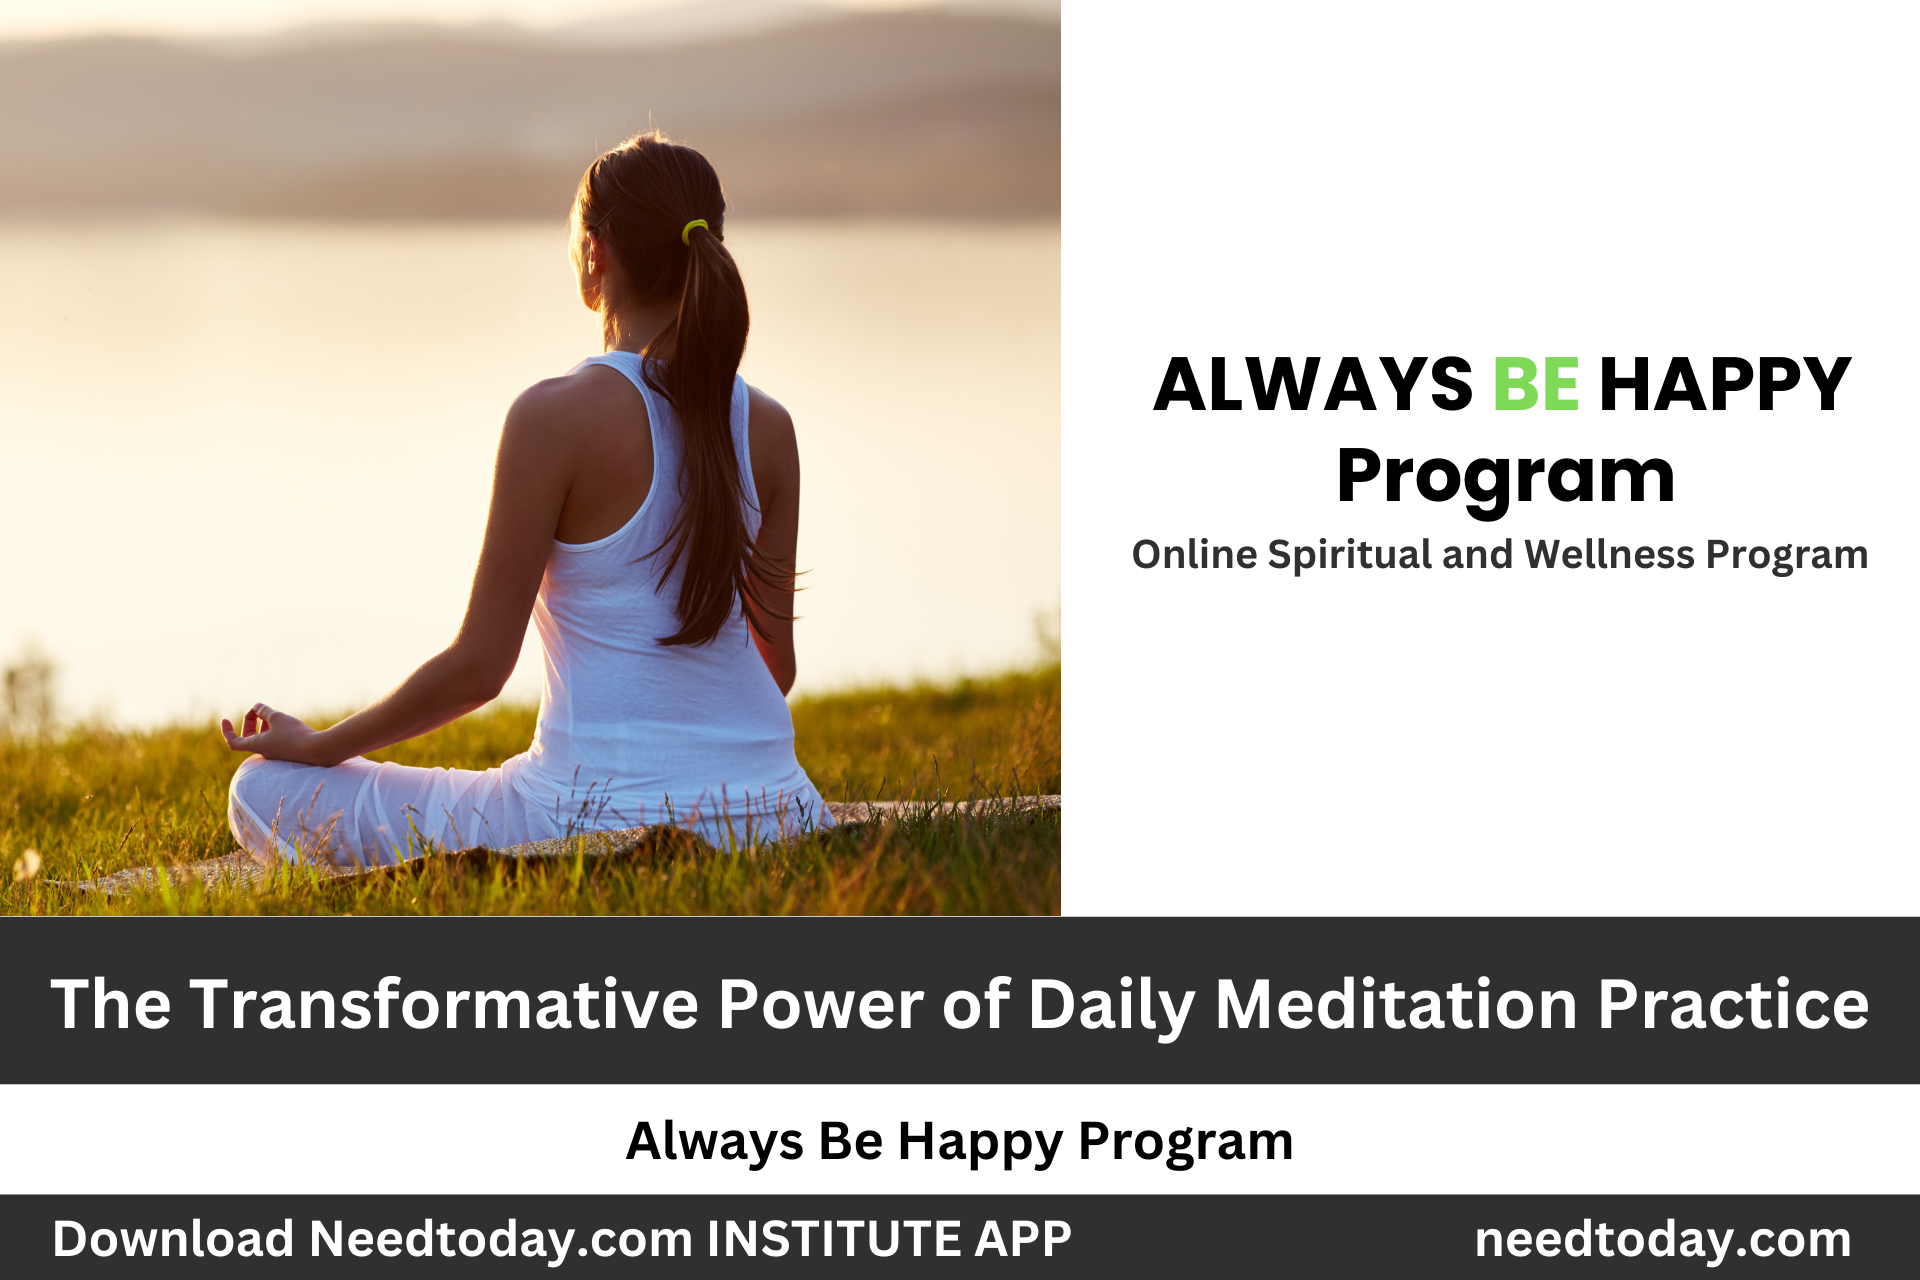 The Transformative Power of Daily Meditation Practice